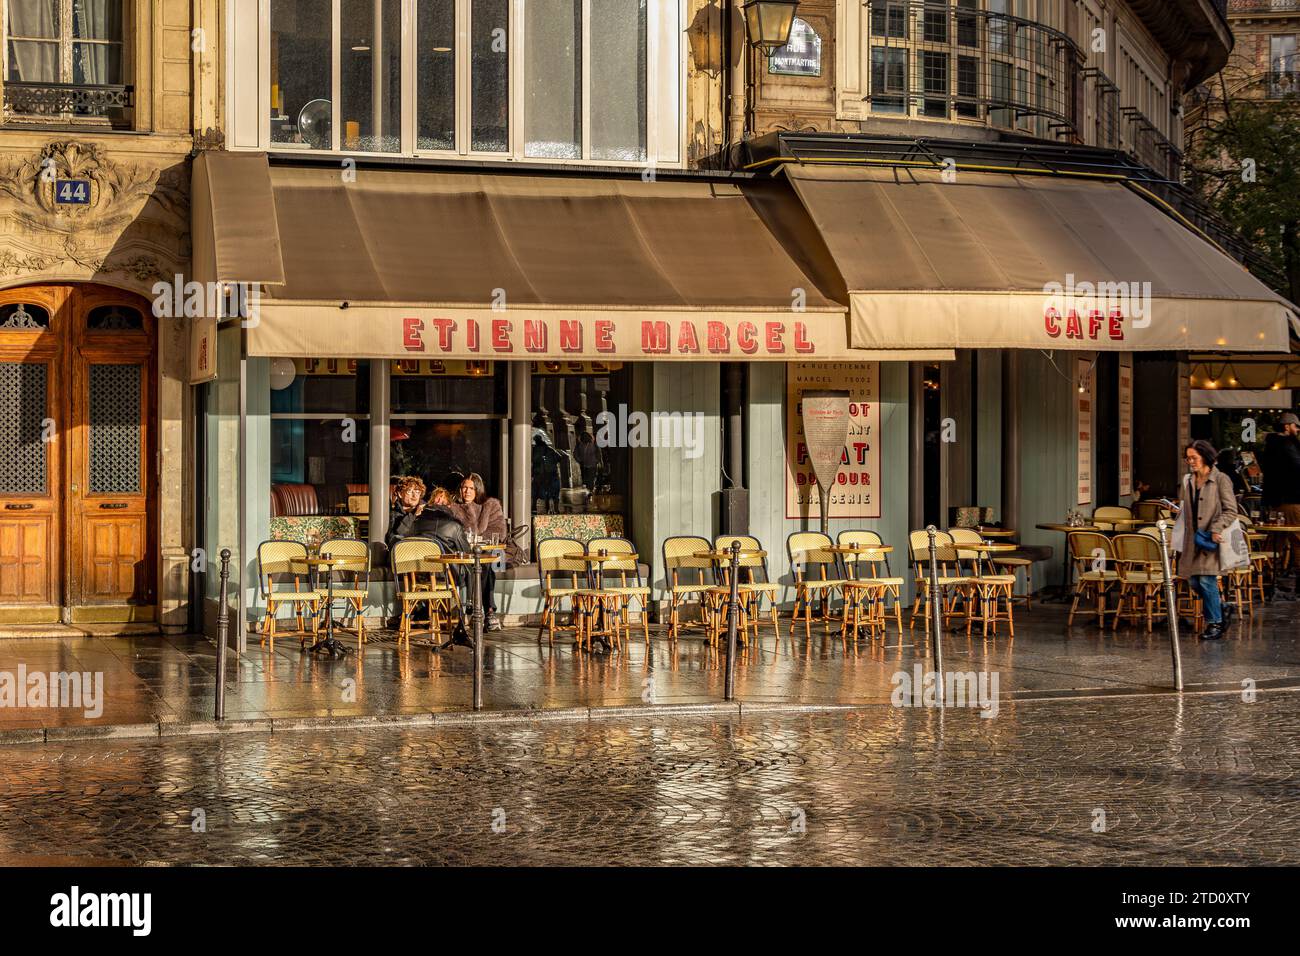 Sunlight reflecting off the wet street in front of Café Etienne Marcel a brasserie, cafe on 34 Rue Étienne Marcel in the 2nd arrondissement of Paris Stock Photo